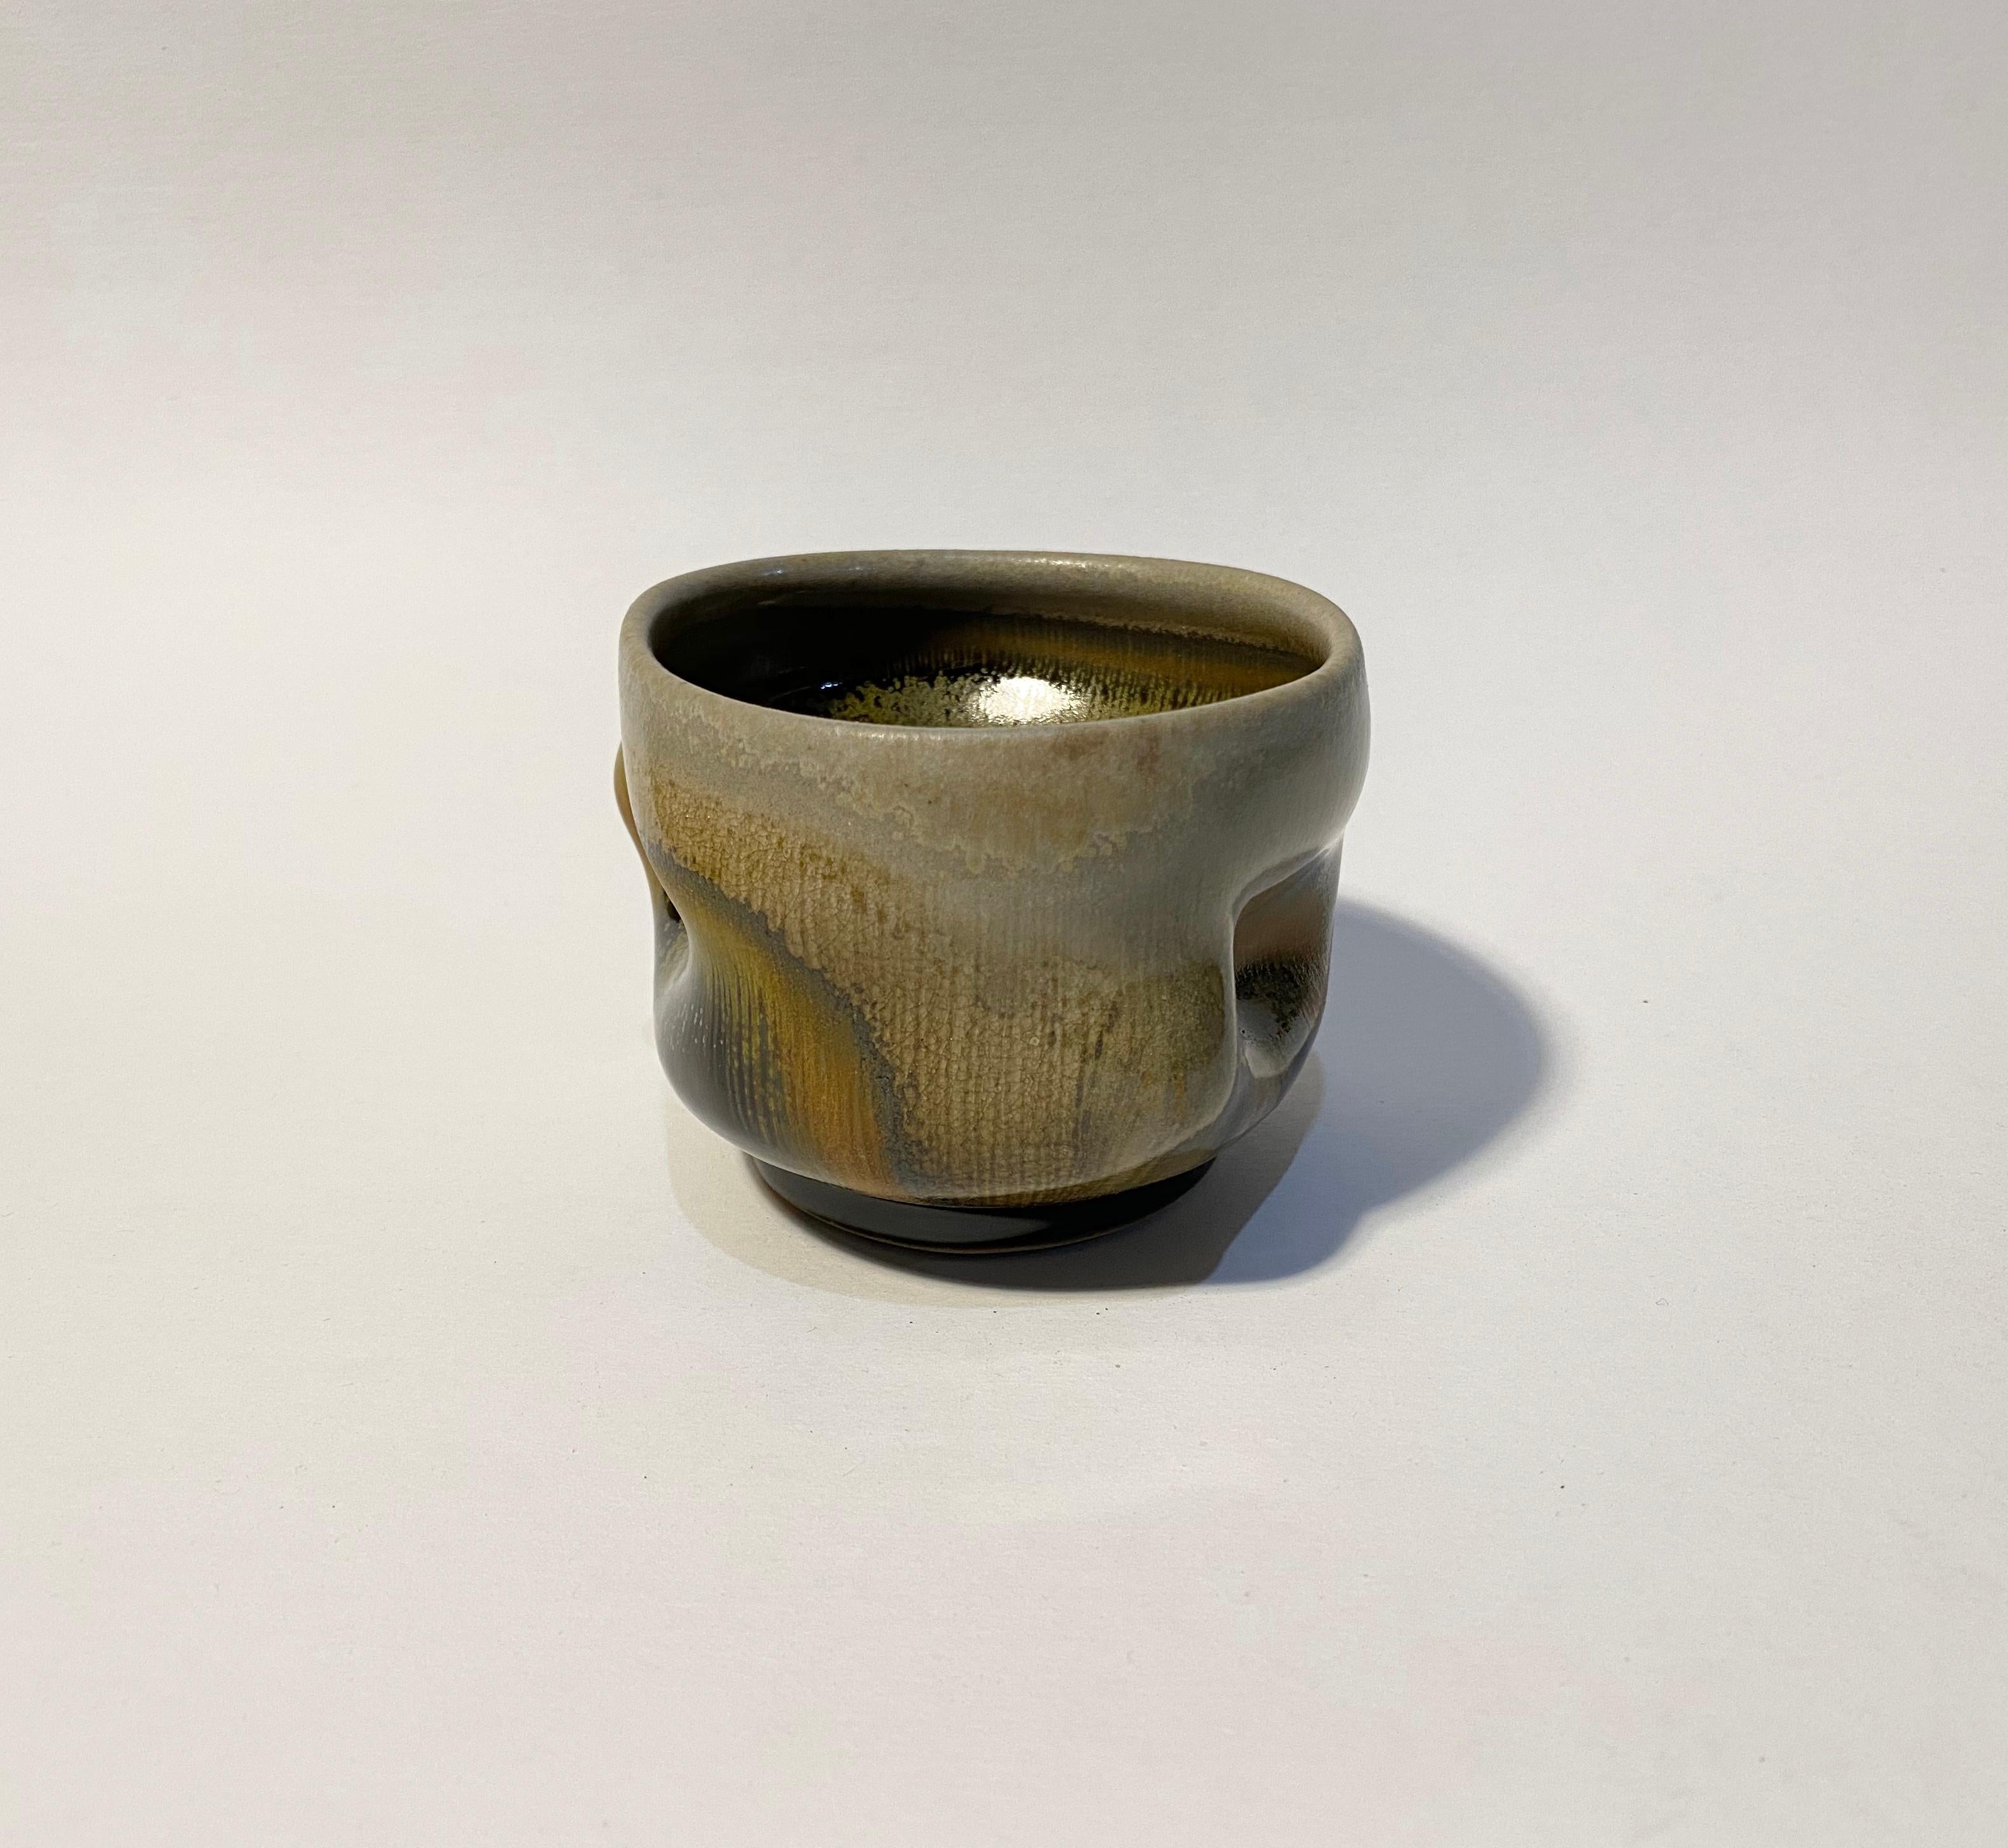 Chris Gustin (born 1952)
Whiskey Cup, 2019
Stoneware
Size: 3 x 4 x 3.75
Anagama wood fired
Signed on the underside with the artist's device

Chris Gustin is a studio artist and Emeritus Professor at the University of Massachusetts, Dartmouth.